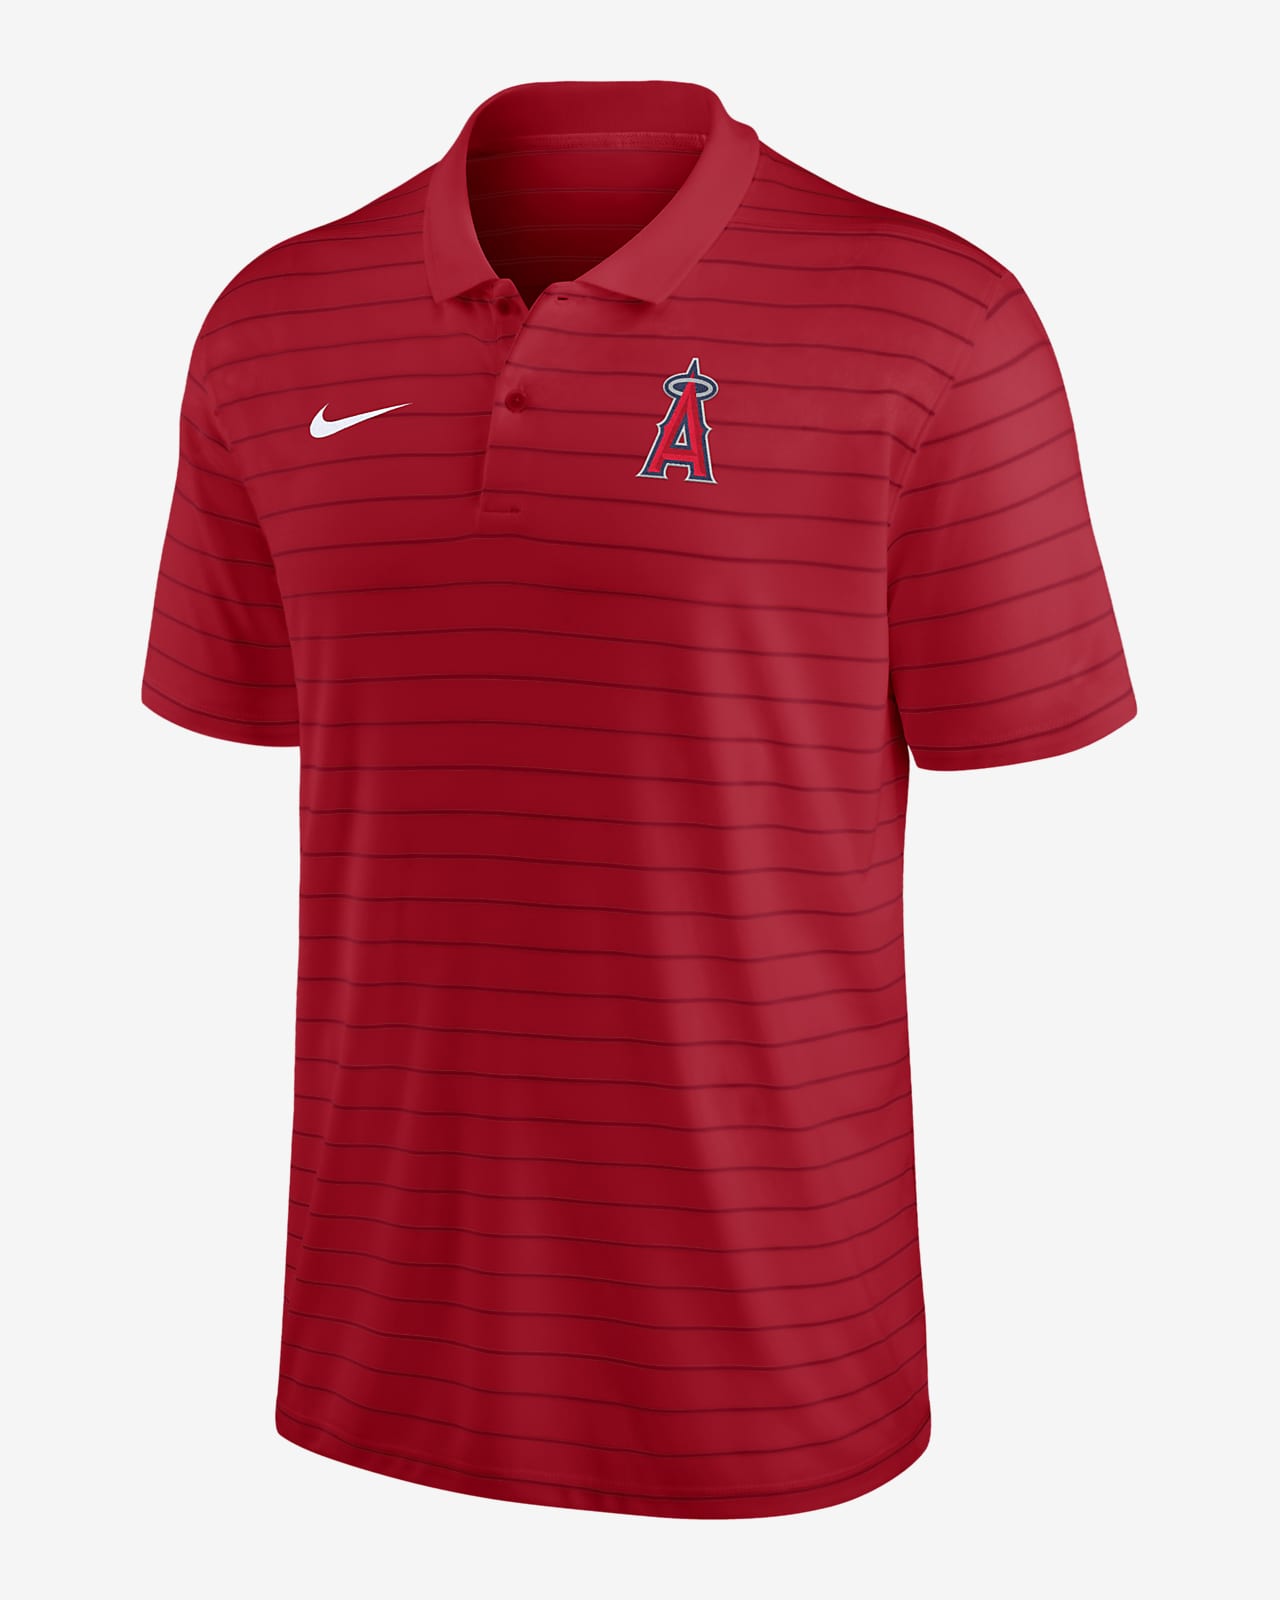 The Athletic Dept Nike Short Sleeve Polo Shirt Striped Cream Red